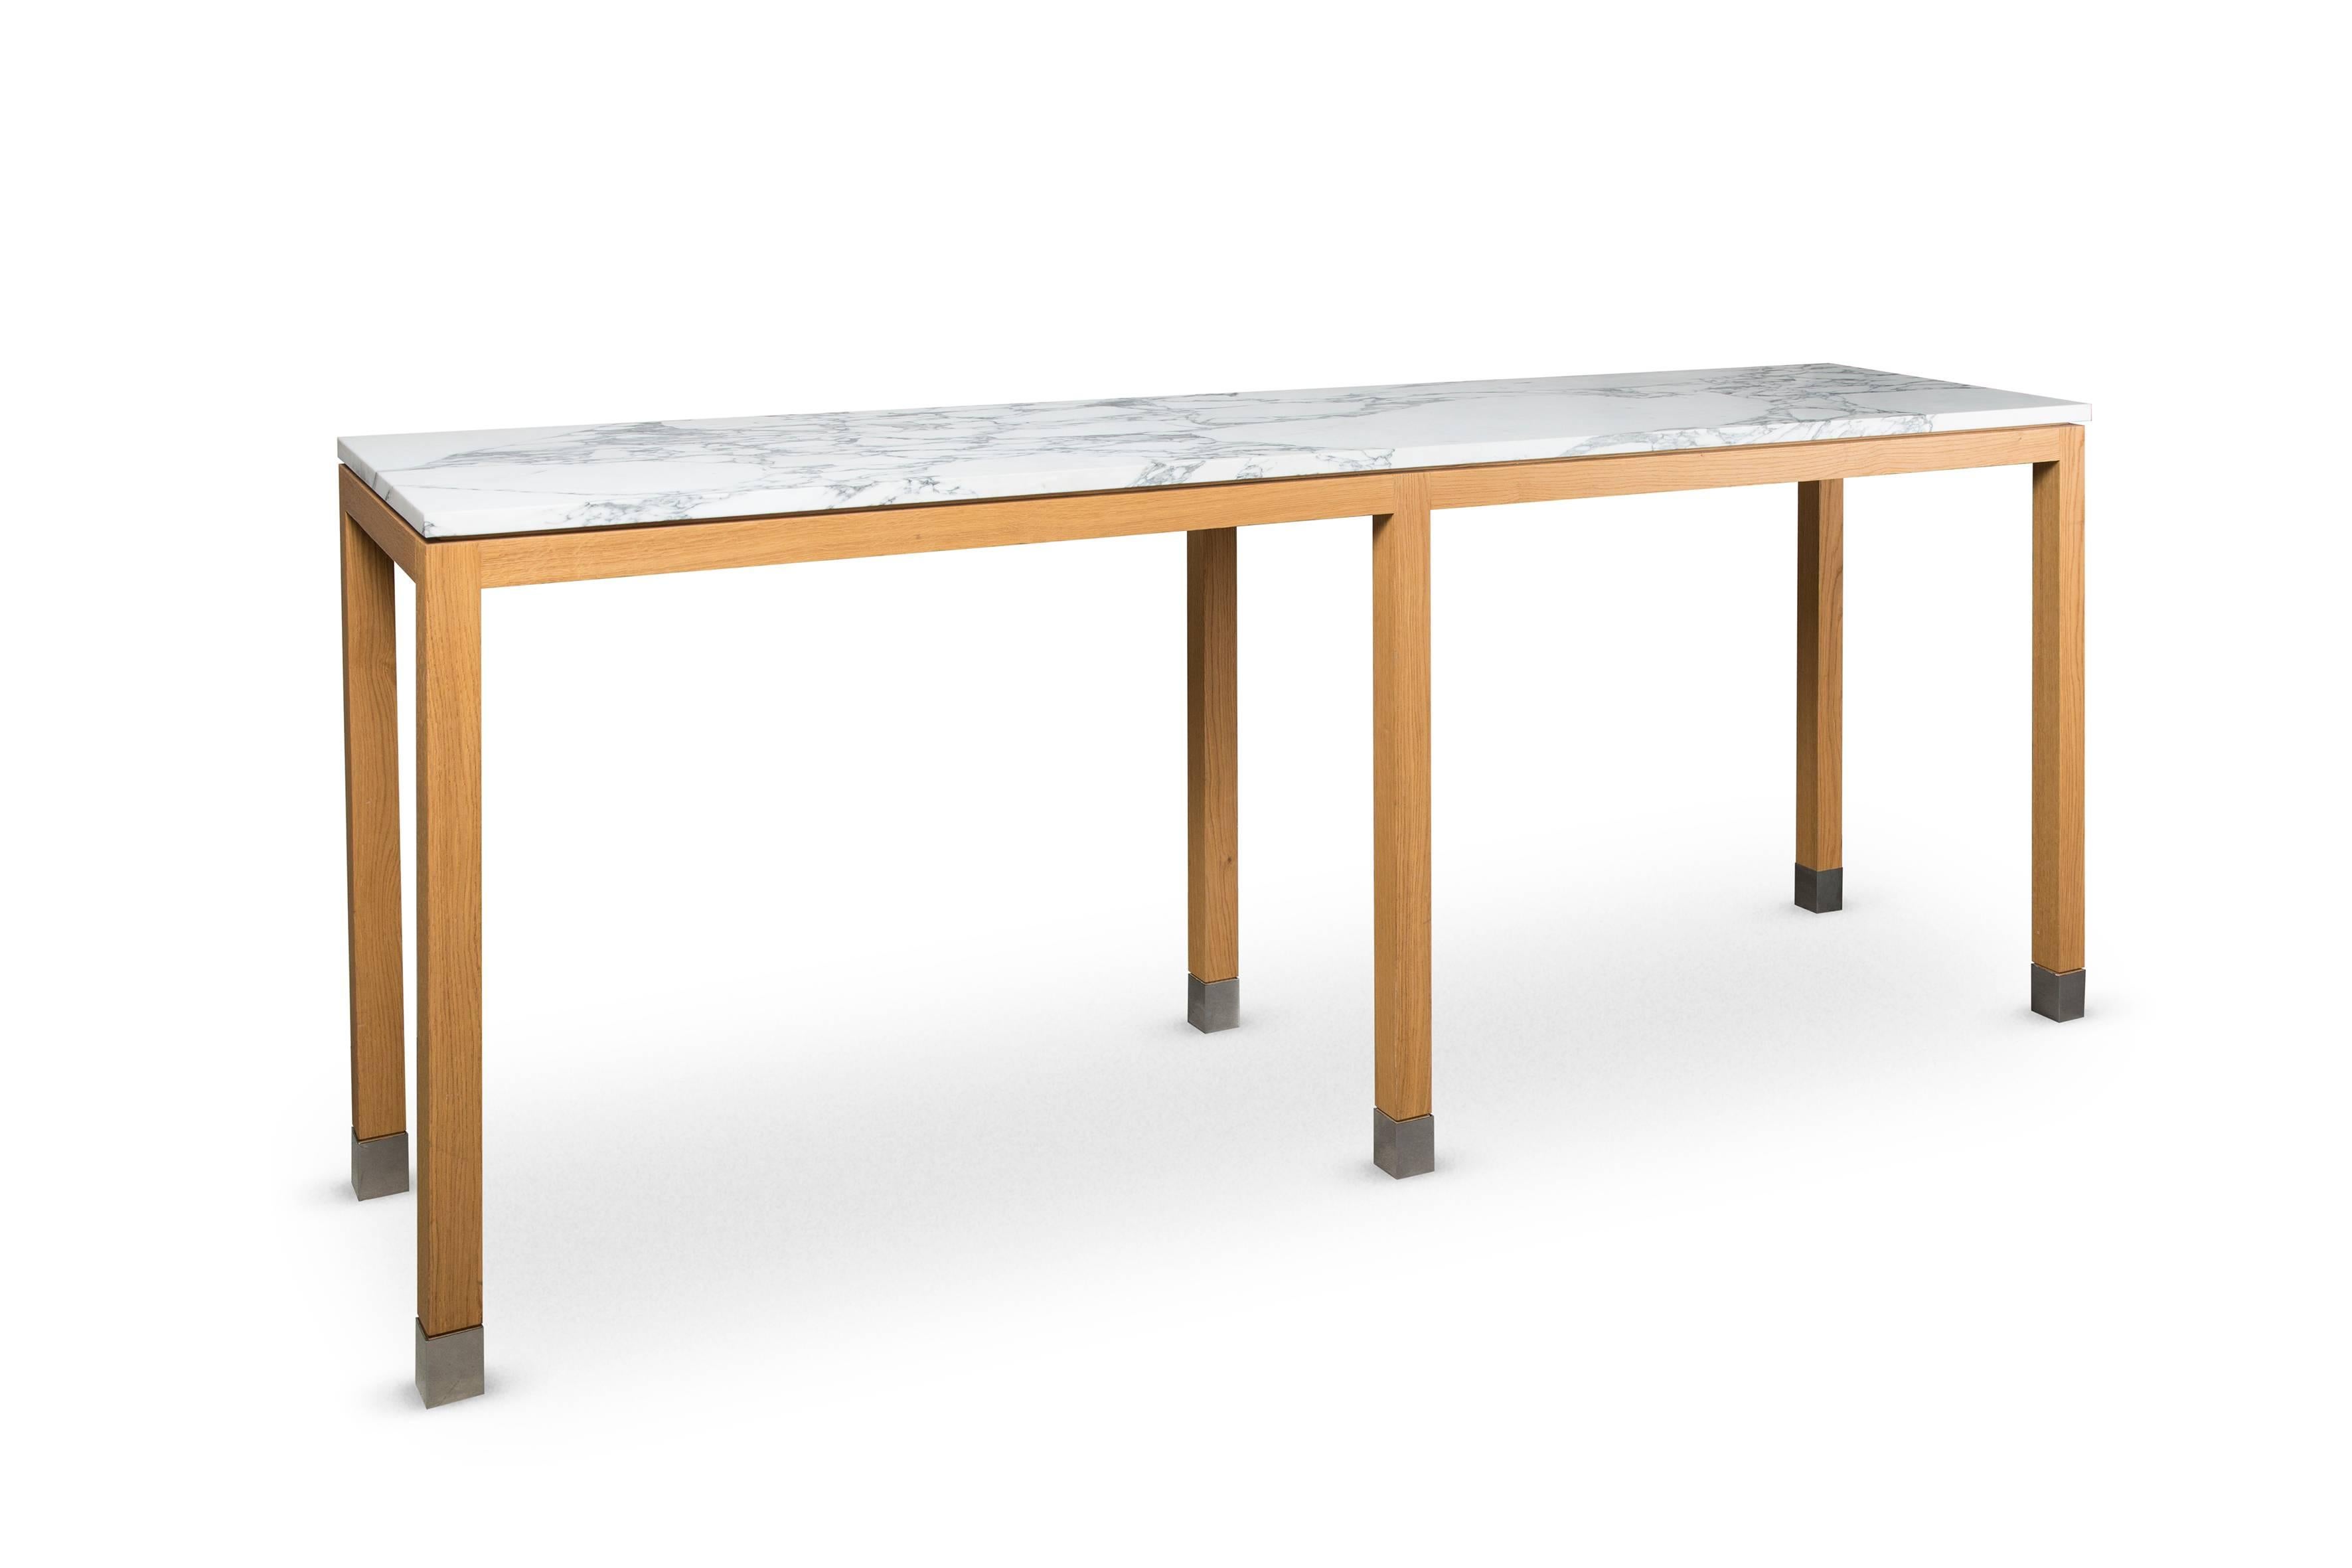 A wood and backlit marble high table, created by Rinck in 2010

Details:

Arabescato marble top, polished and backlit.
Solid oakwood base
Stainless steel sabots.

 